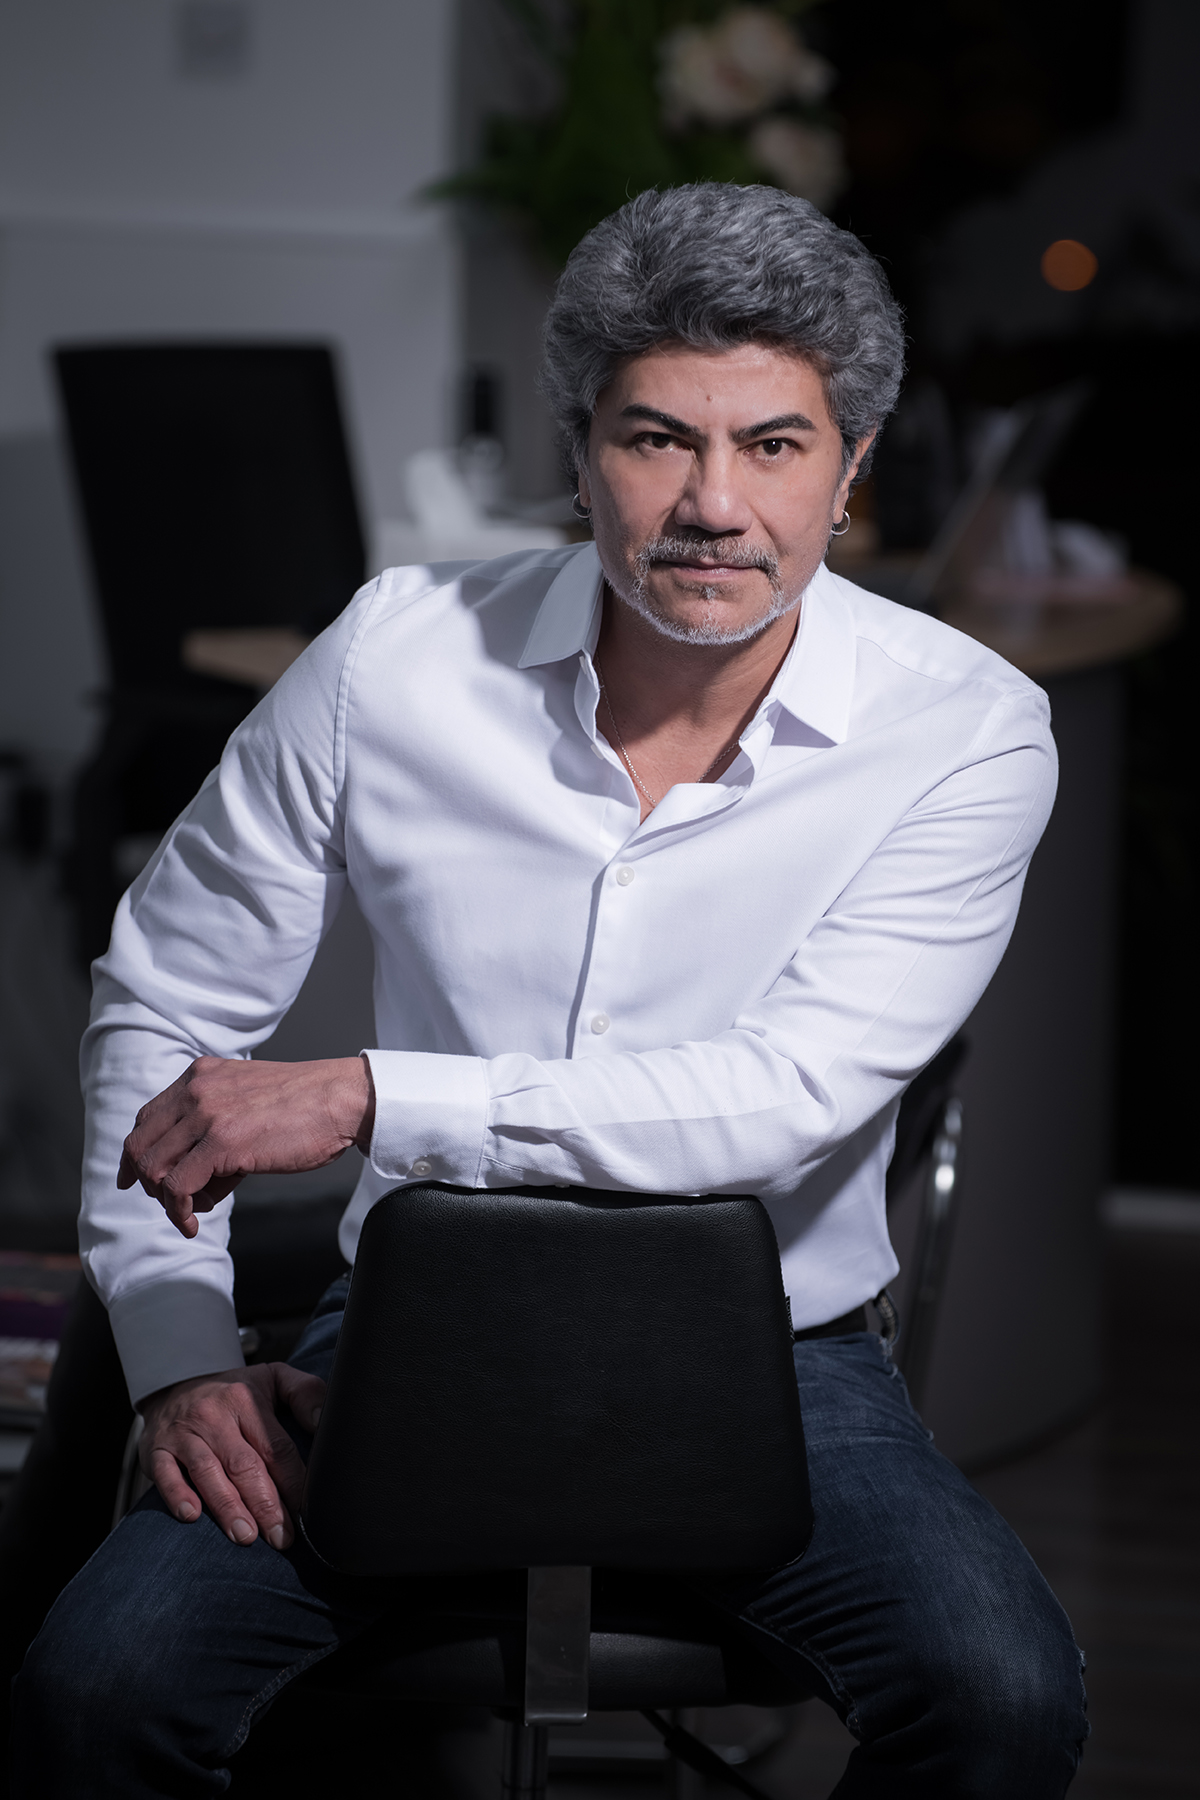 CEO & Senior stylist
Jair has been a hairdresser for 20 years, he has always had a passion for hair, beauty and fashion therefore loving making people feel positive about themselves.